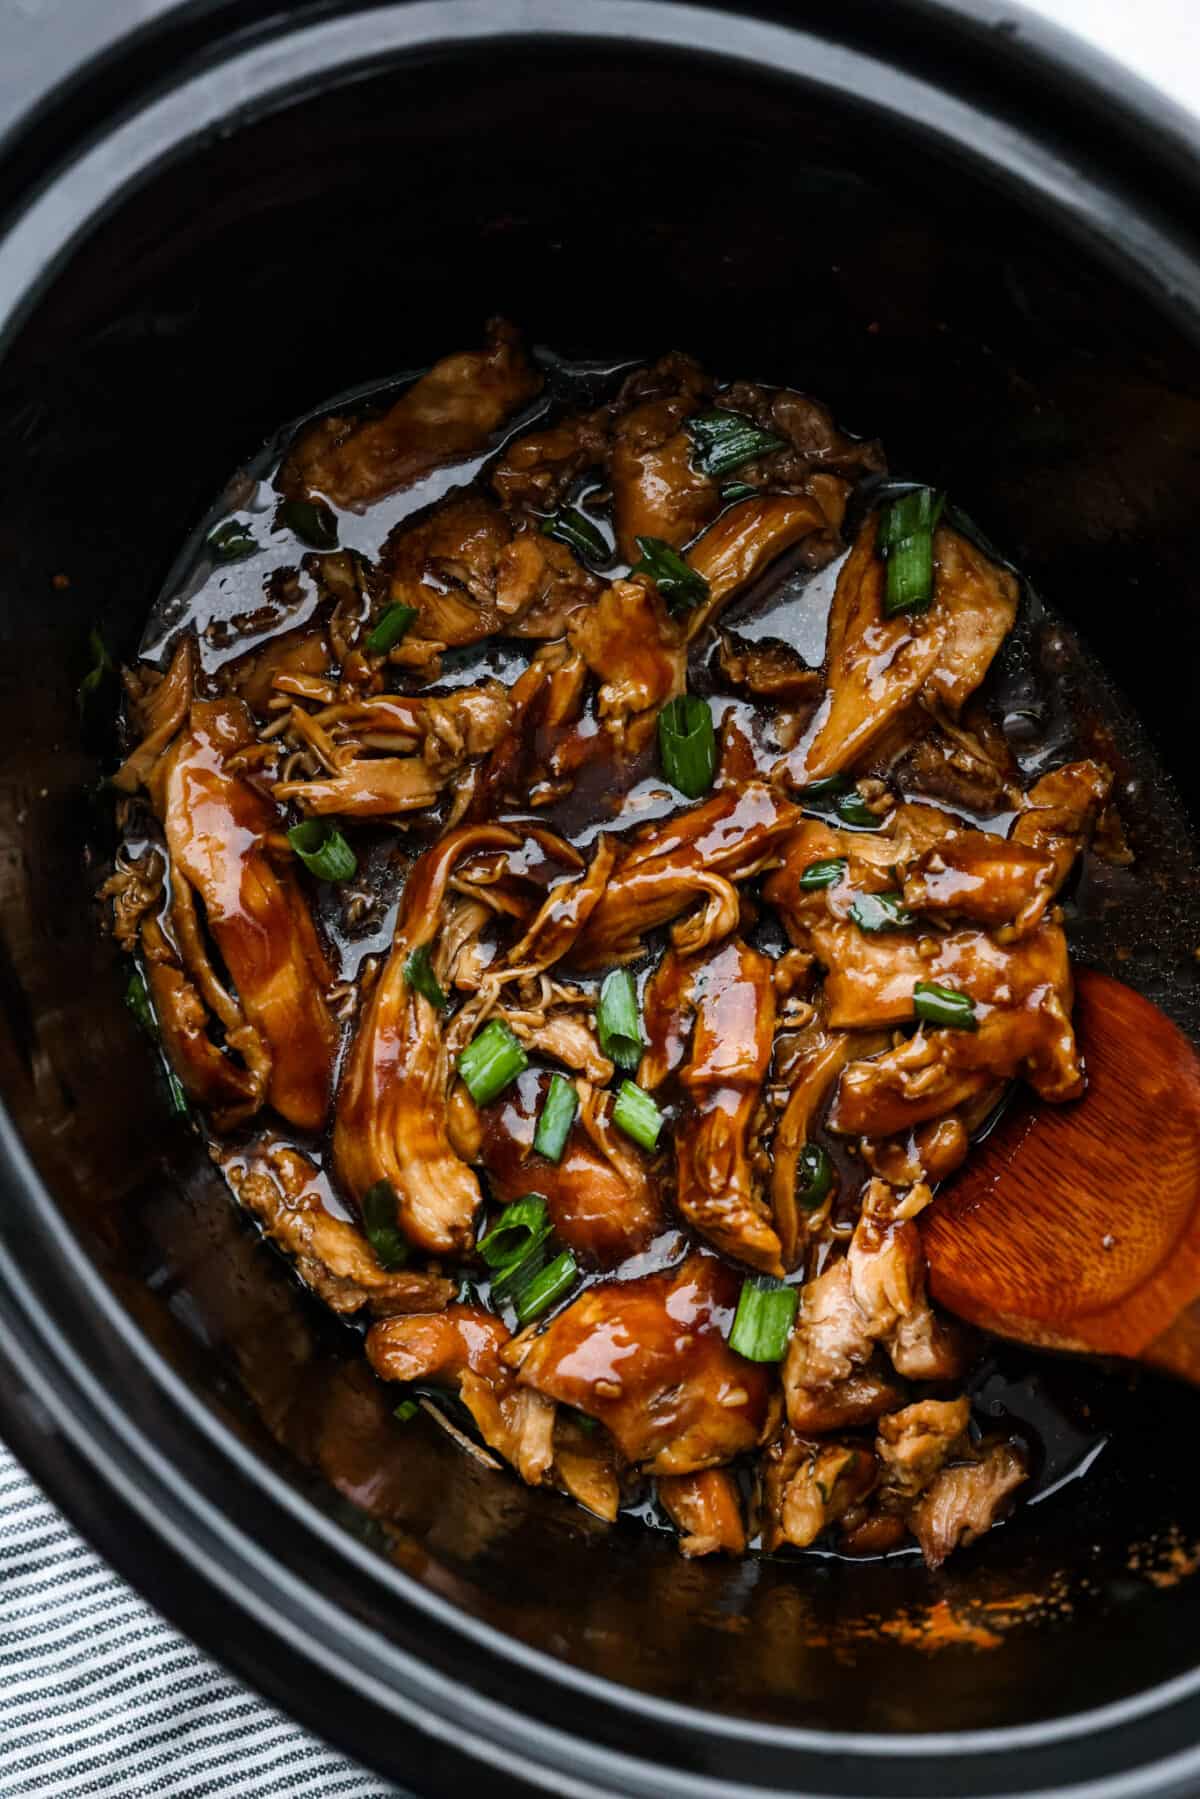 Top view of crockpot bourbon chicken in a black crockpot with a wooden spoon.
